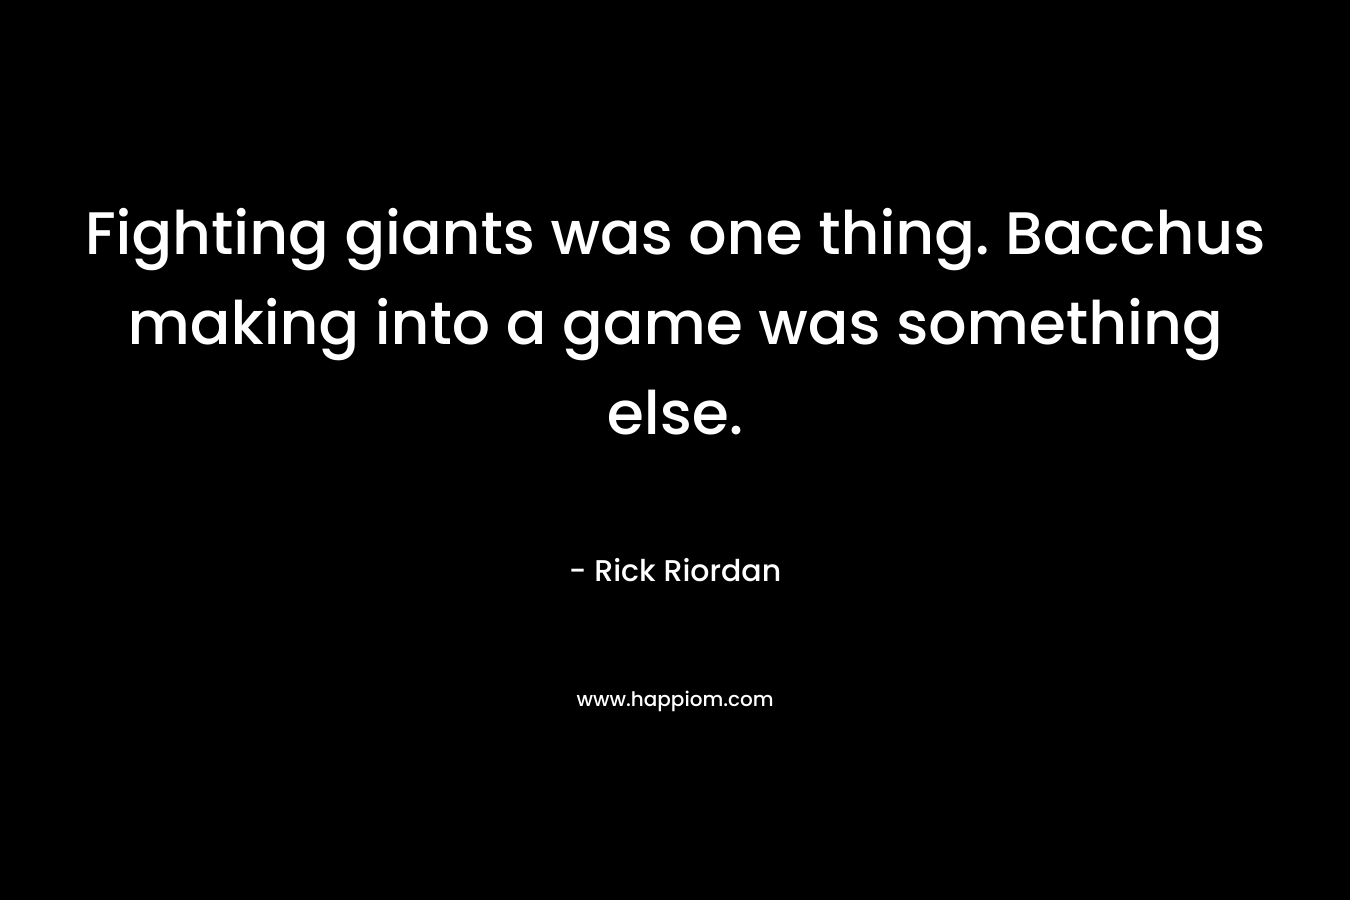 Fighting giants was one thing. Bacchus making into a game was something else. – Rick Riordan